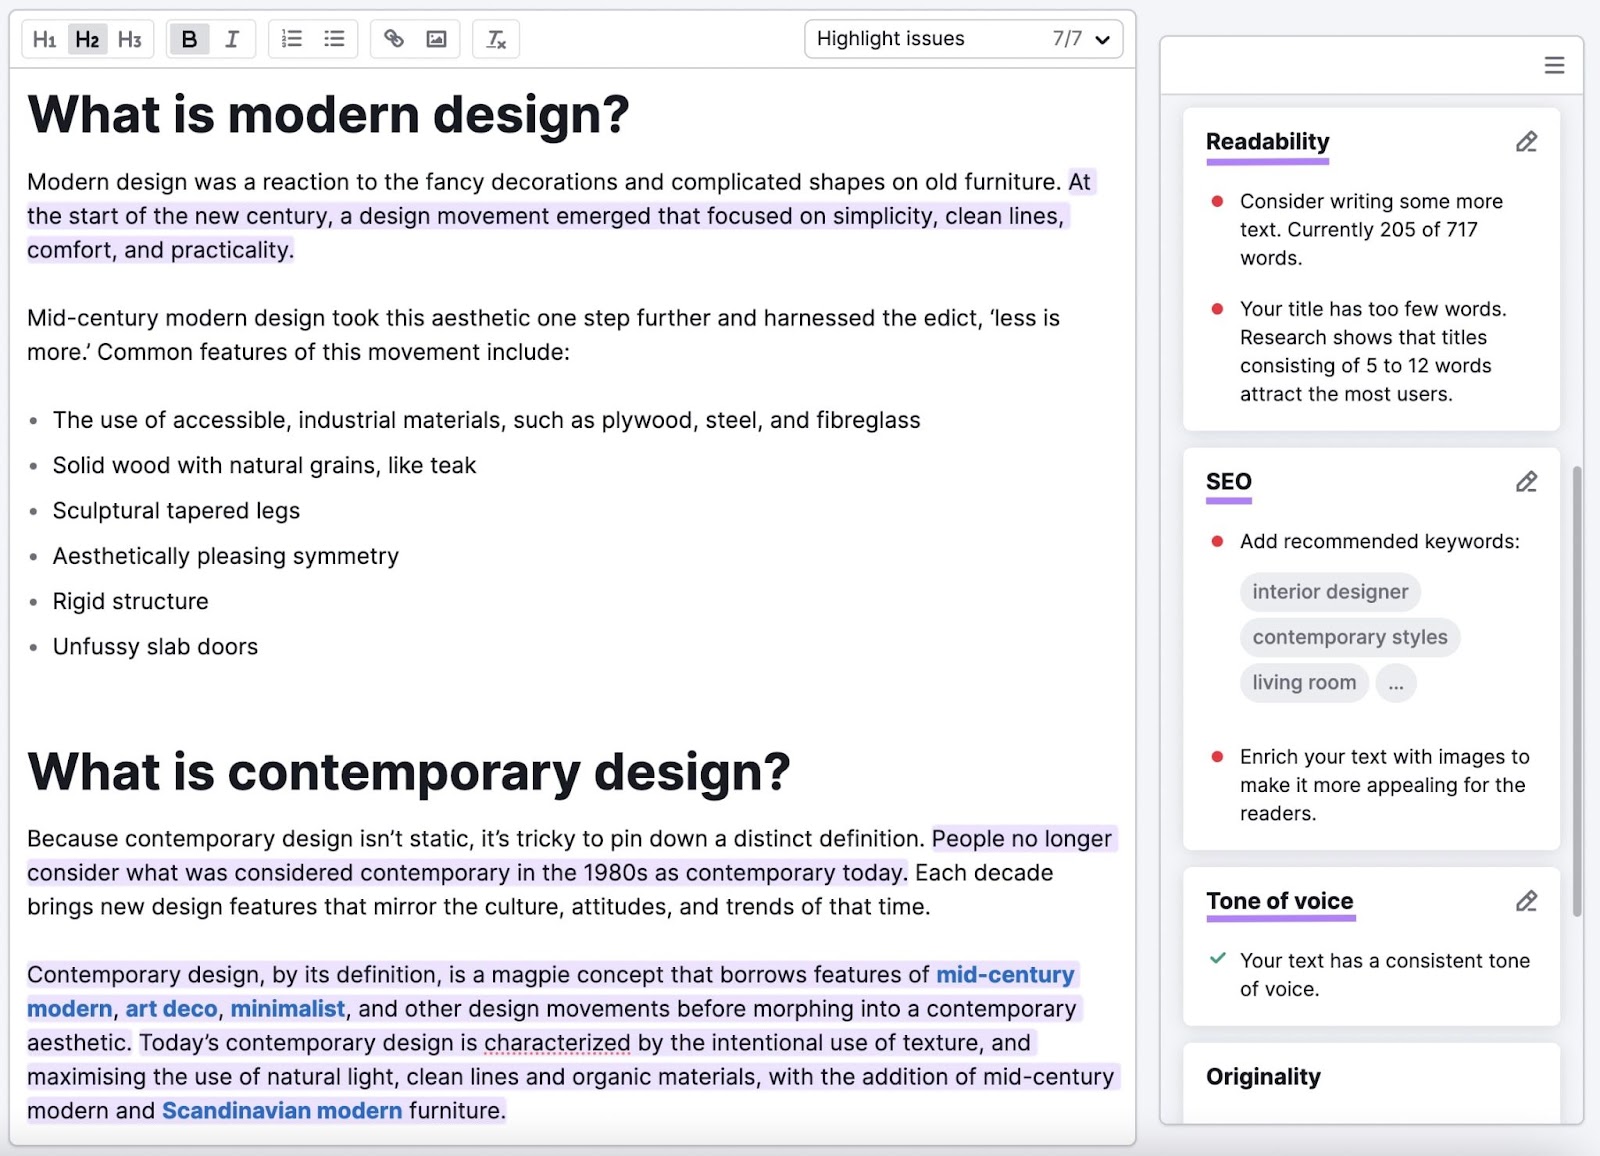 Article about modern design assessed for tone of voice, readability, and SEO within the SEO Writing Assistant tool